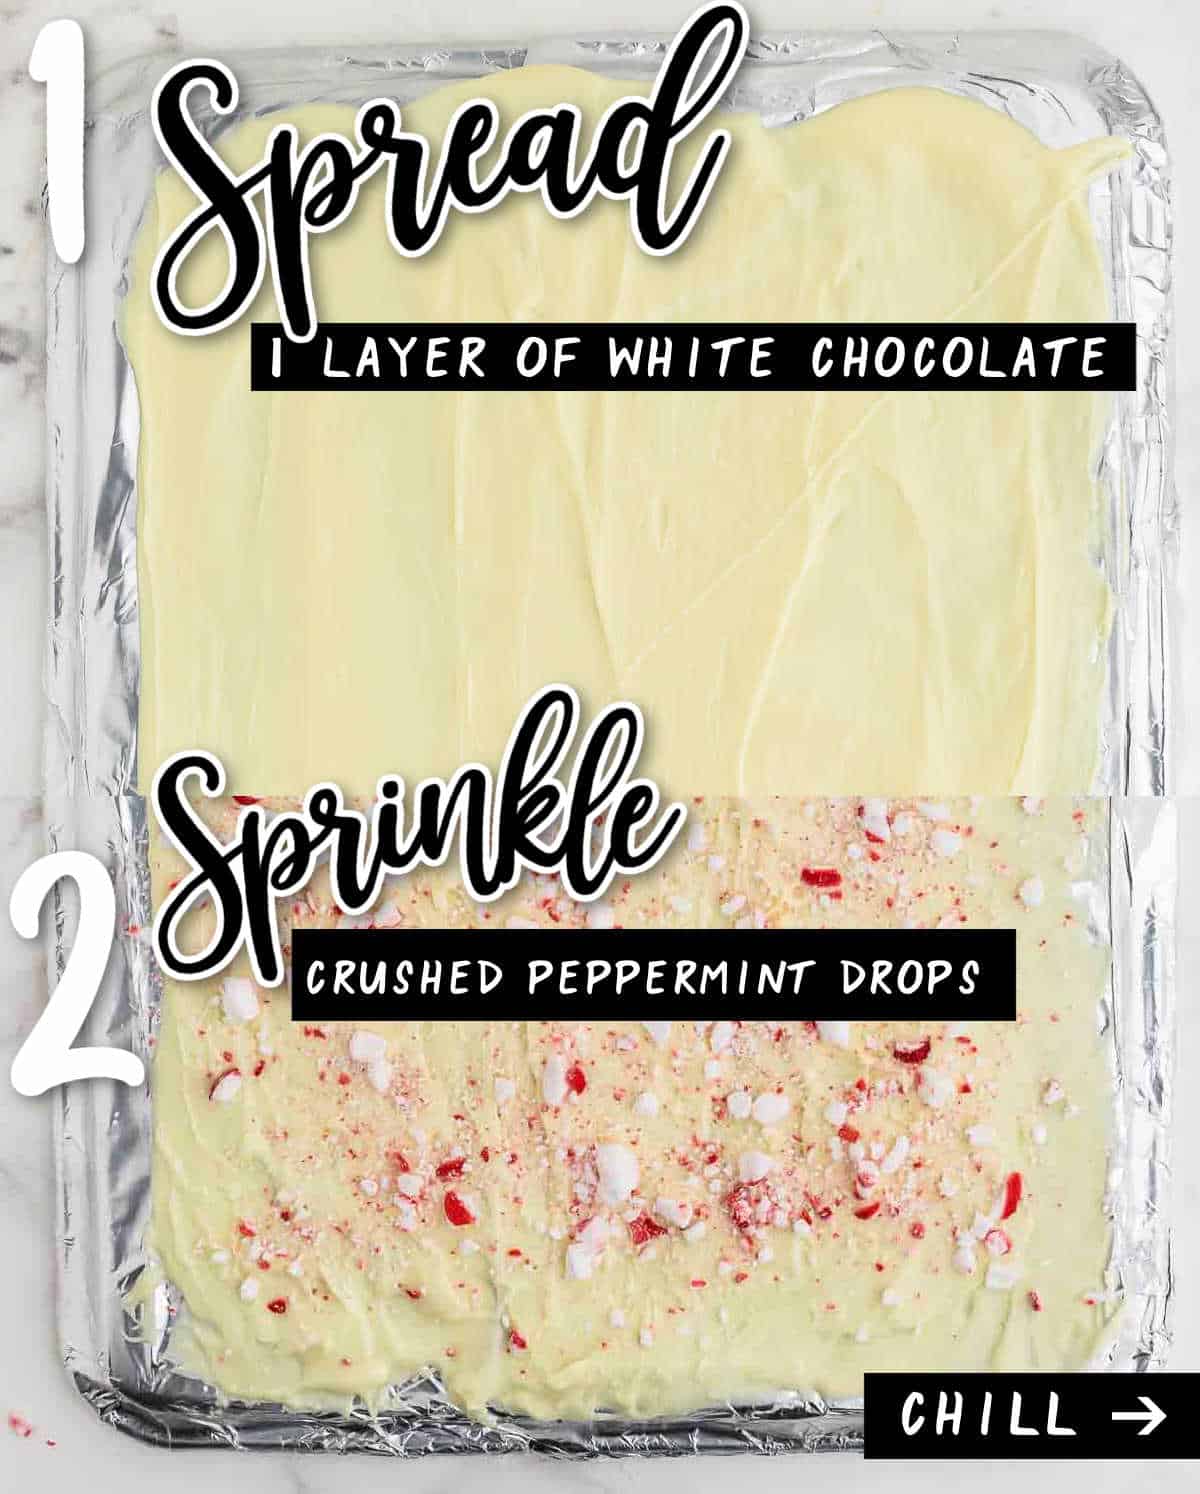 STEP 1: Spreading melted white chocolate + Step 2: Sprinkling crushed peppermint drops -> Chill